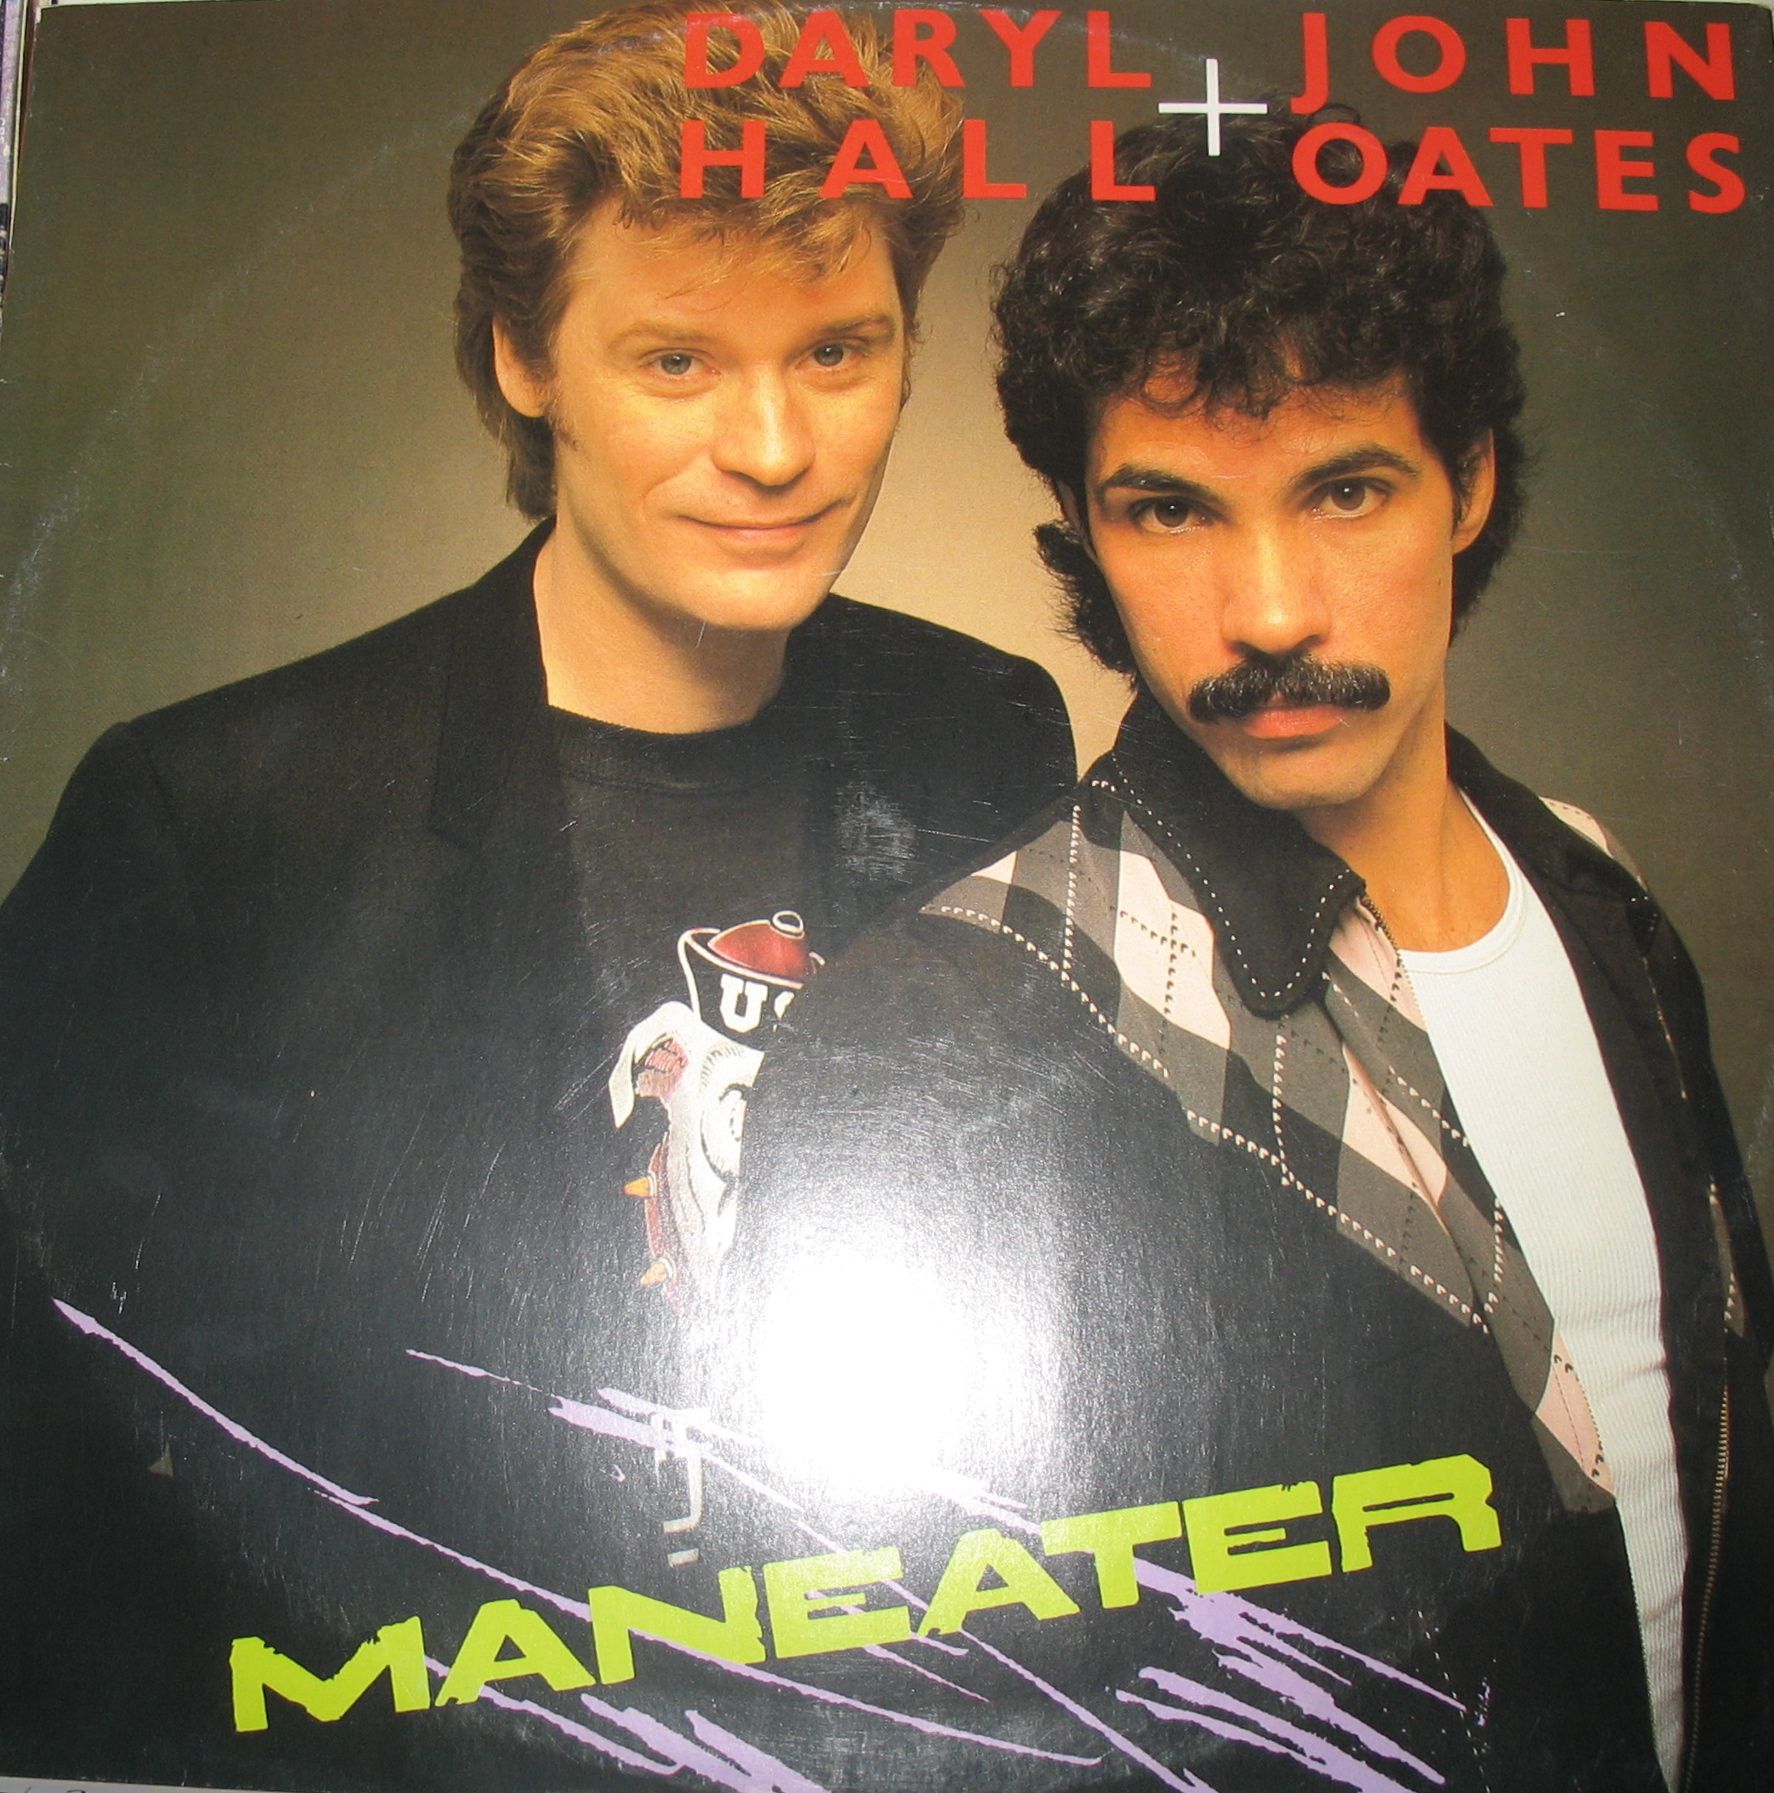 Hall & Oates: Maneater (Video 1982)